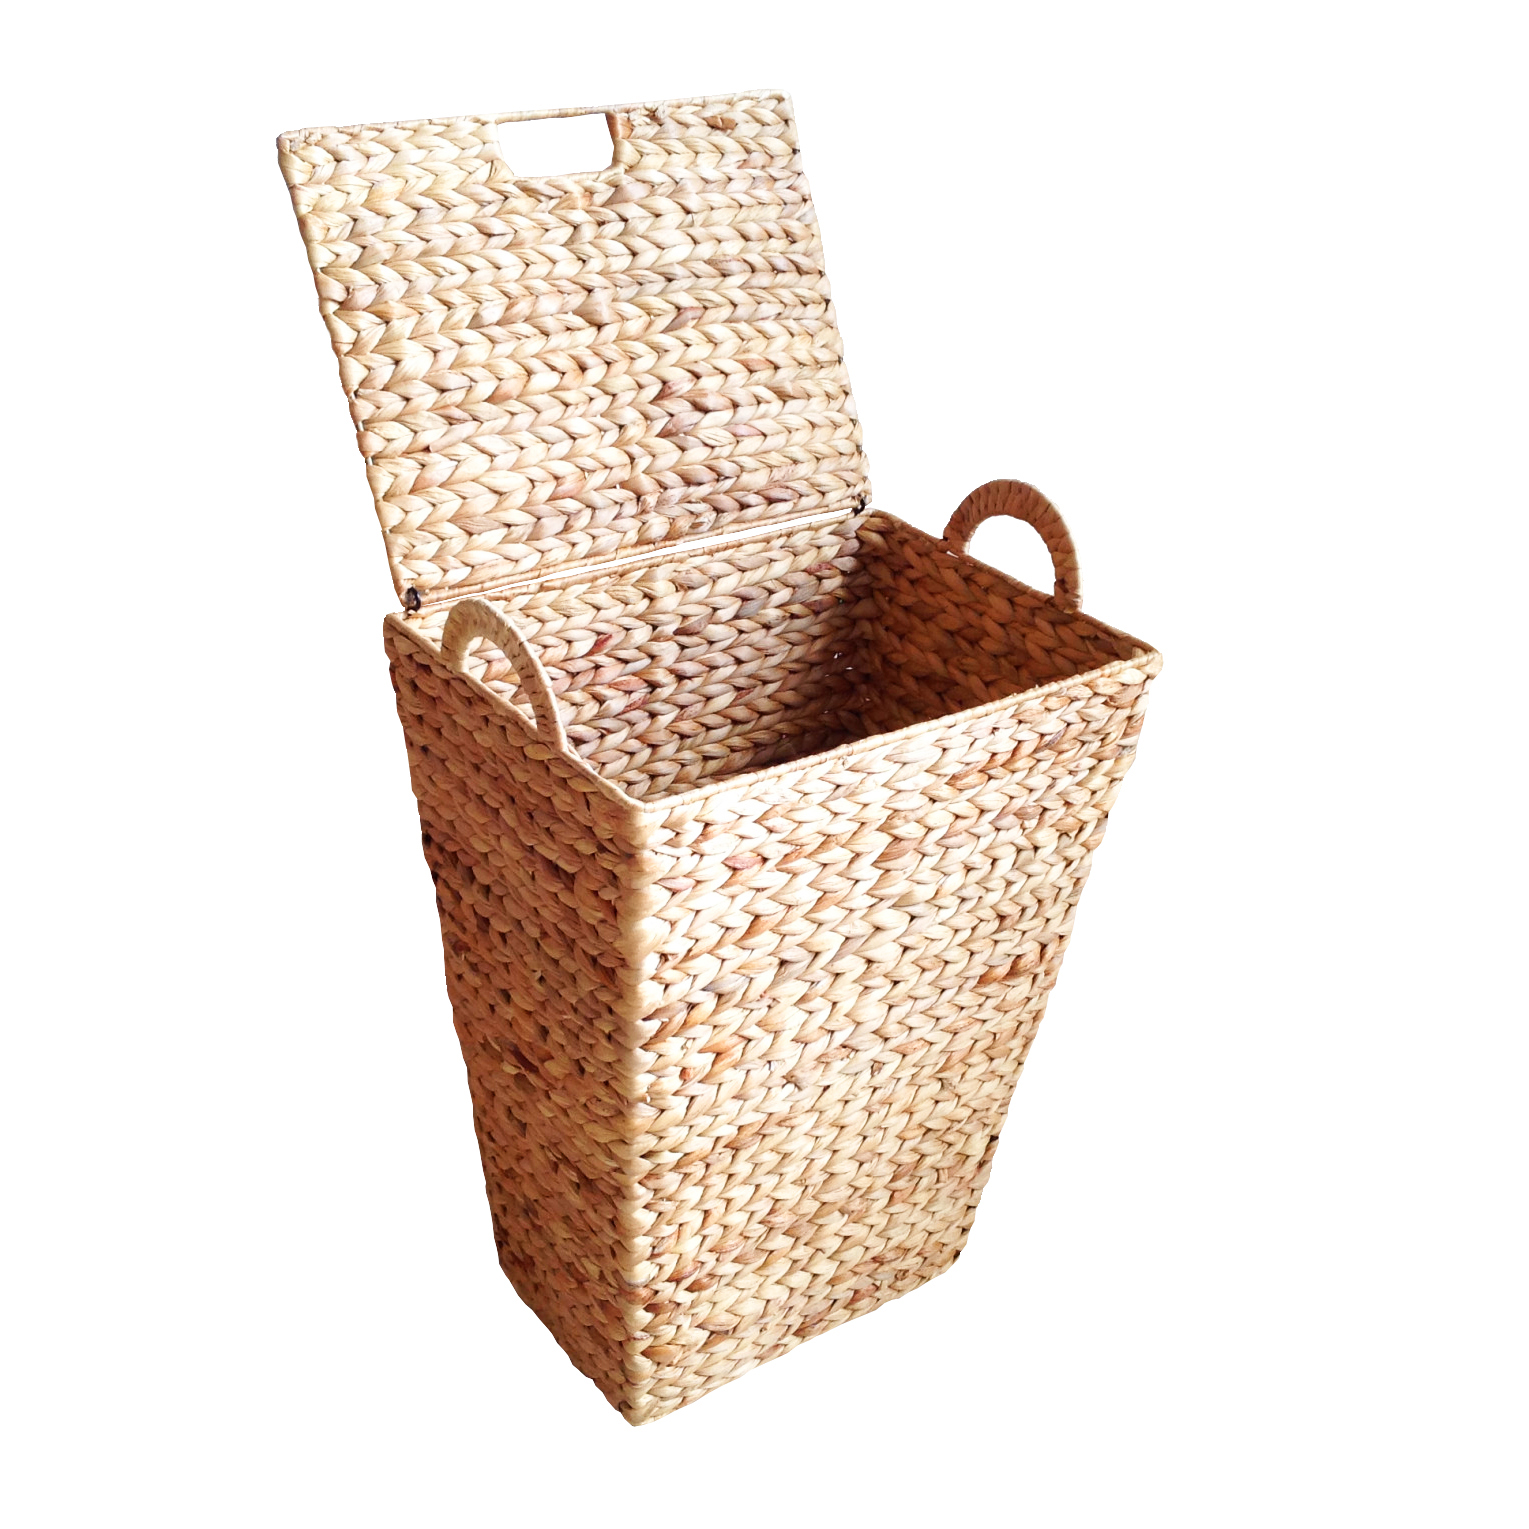 Good Price Rectangular Water Hyacinth Hamper Covered With Lids And 2 Small Baskets Handles On Both Sides Are Easy To Move 3